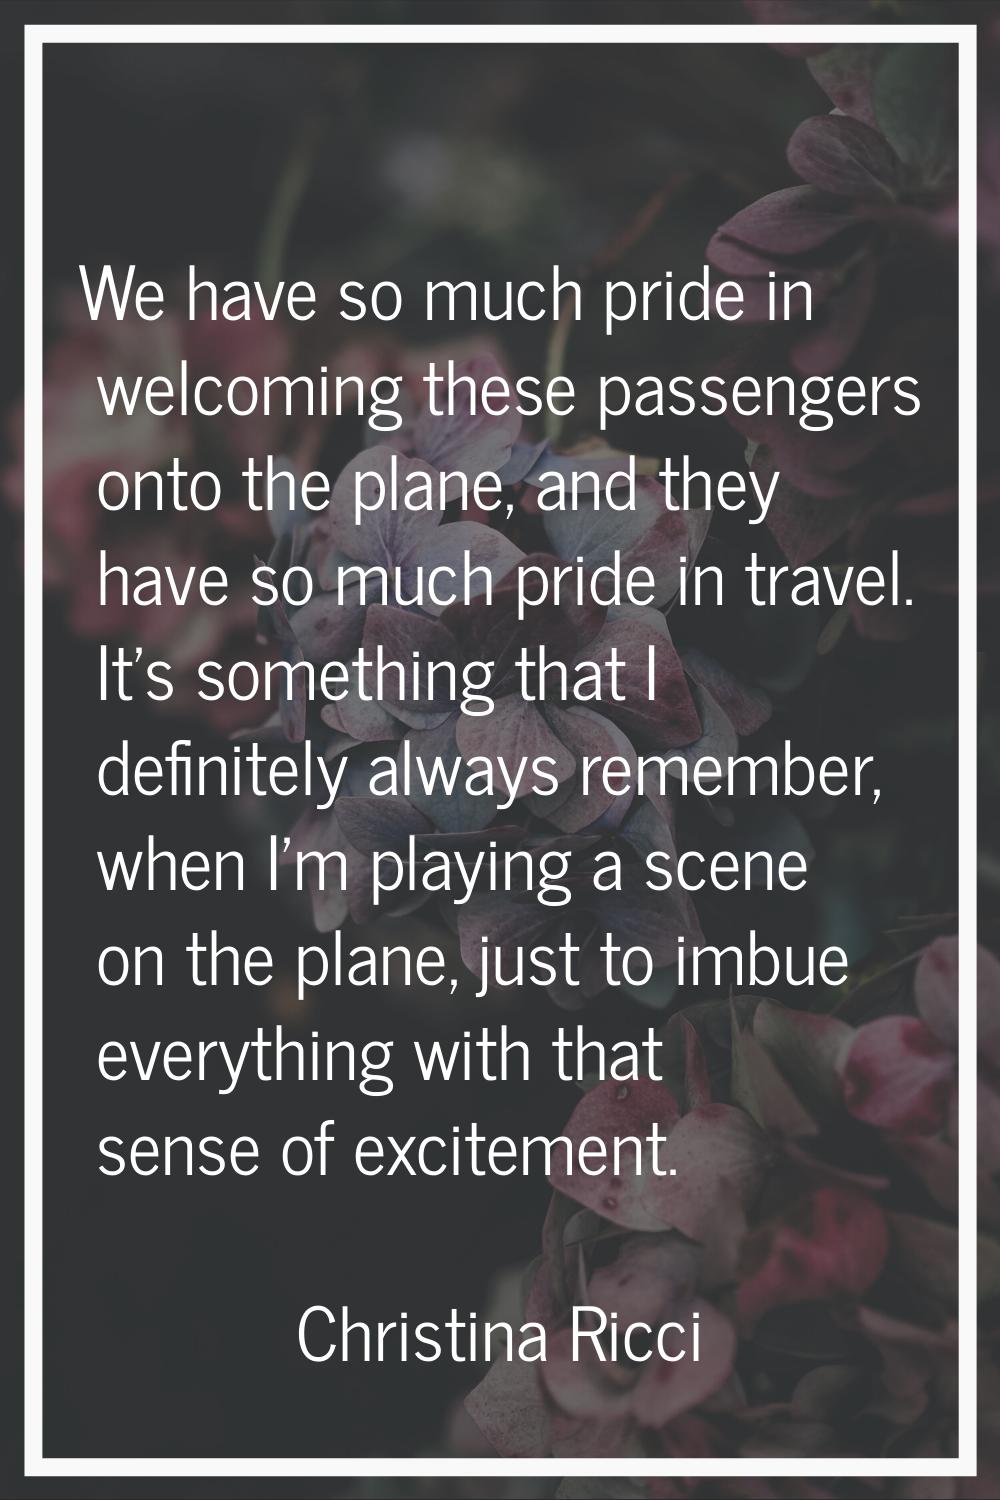 We have so much pride in welcoming these passengers onto the plane, and they have so much pride in 